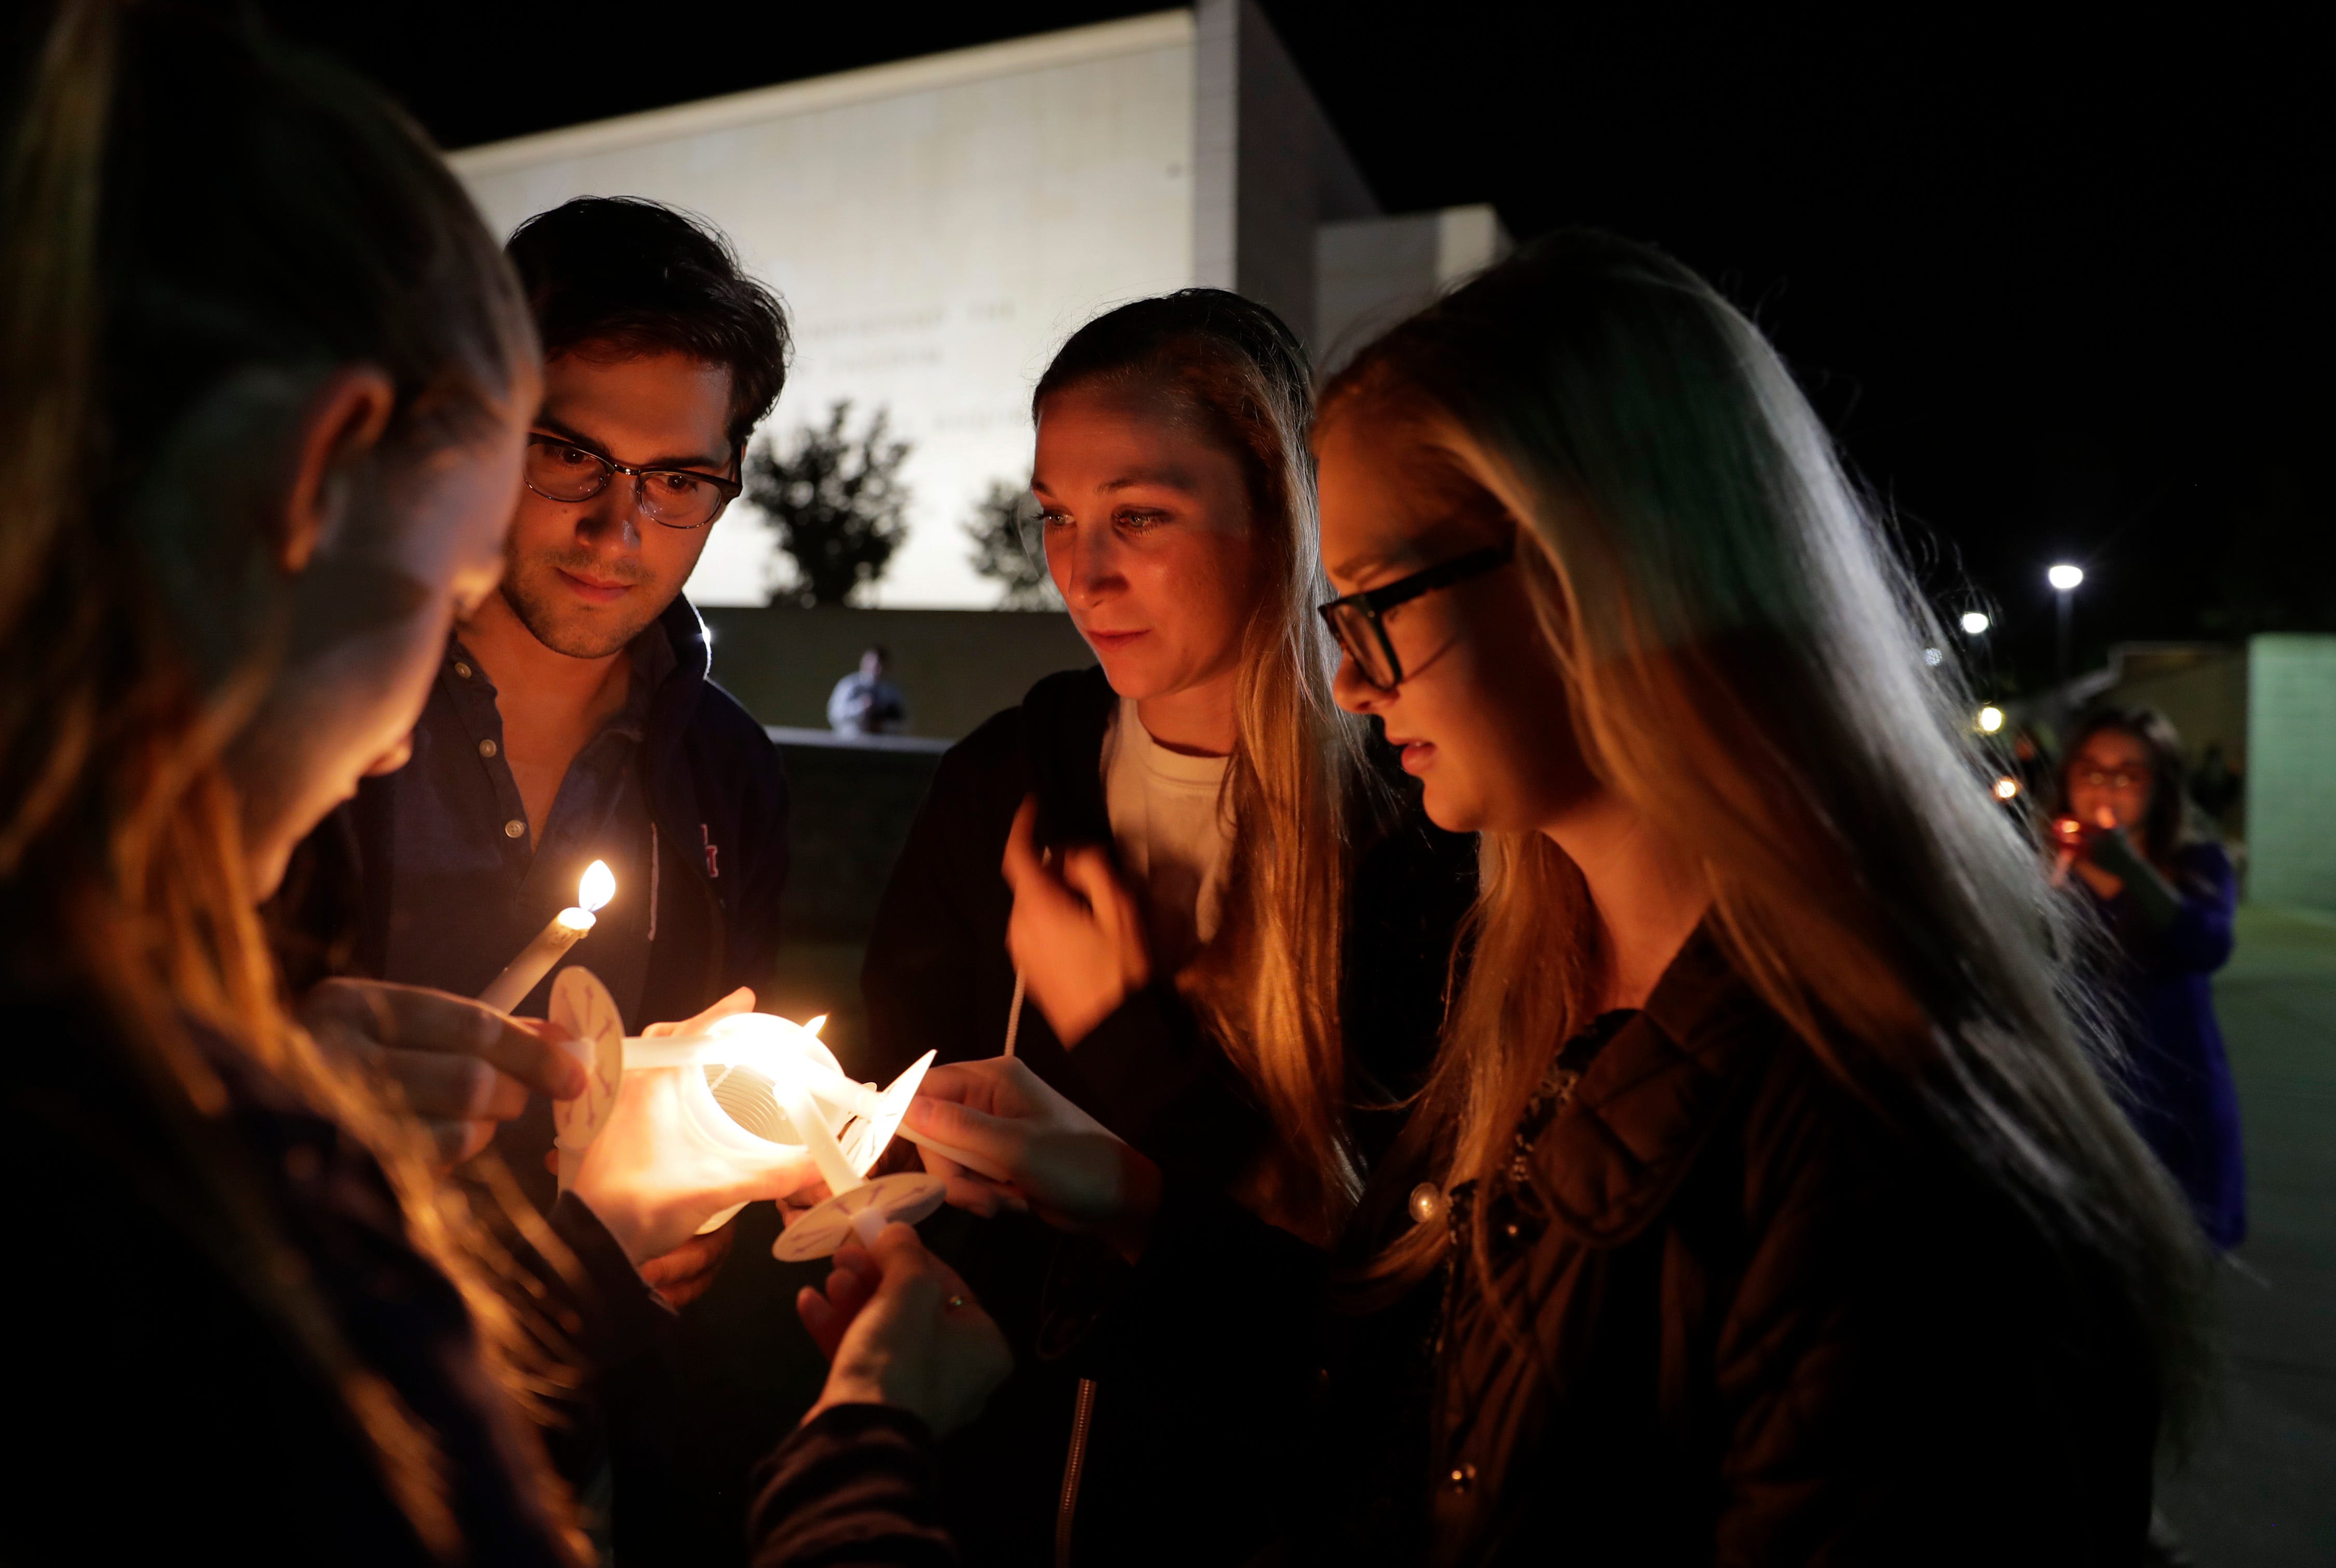 Texas A&M students gather for a candlelight vigil and memorial behind the George Bush Presidential Library & Museum in College Station, Texas on April 17, 2018 to remember former First Lady Barbara Bush who passed away earlier in the day.